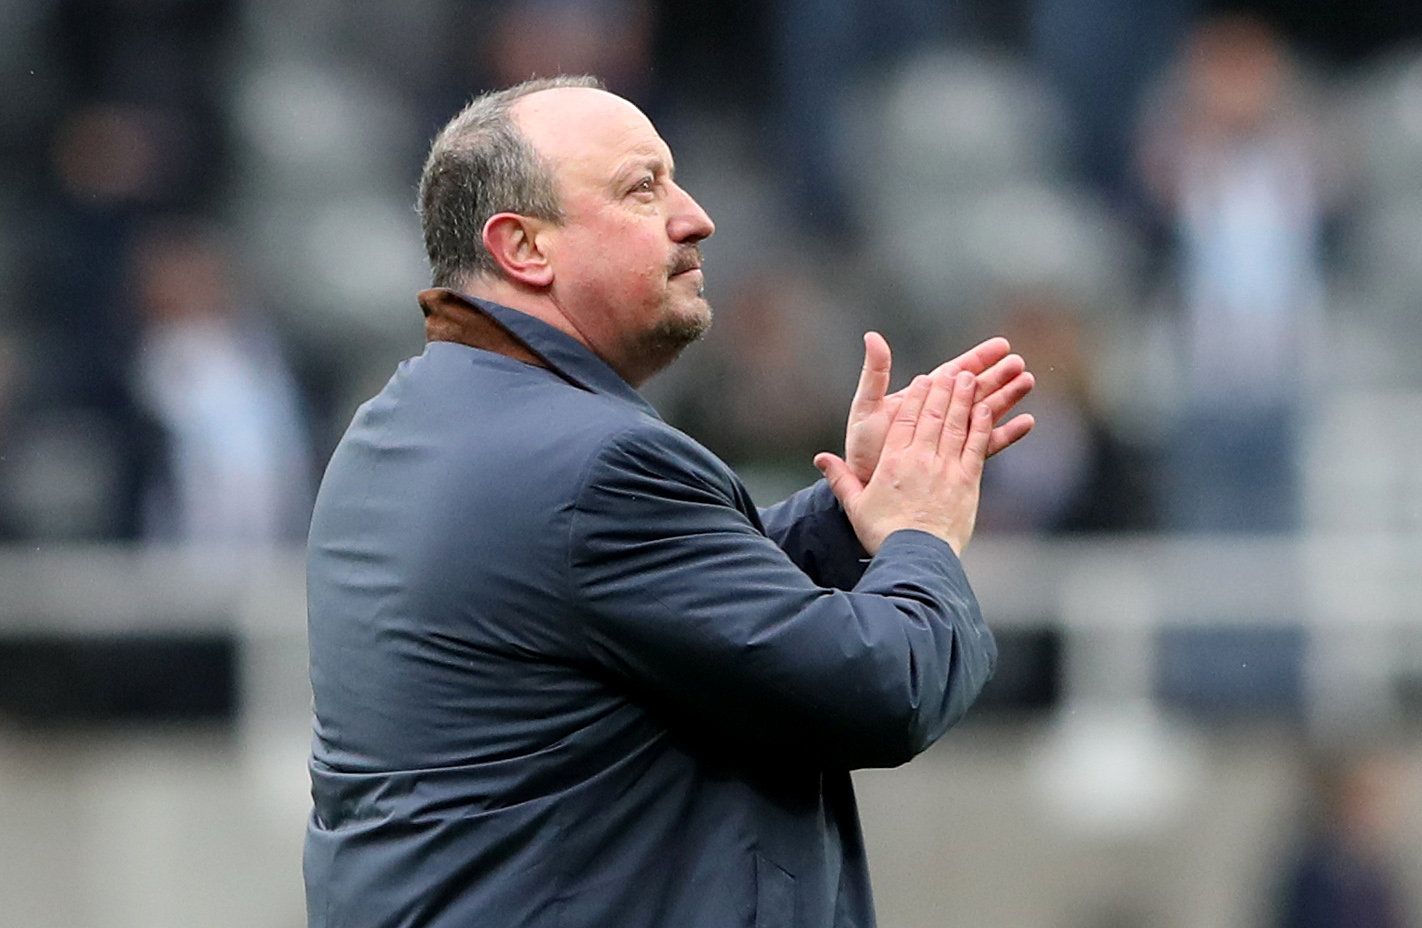 Soccer Football - Premier League - Newcastle United vs Huddersfield Town - St James' Park, Newcastle, Britain - March 31, 2018   Newcastle United manager Rafael Benitez applauds the fans at the end of the match    REUTERS/Scott Heppell    EDITORIAL USE ONLY. No use with unauthorized audio, video, data, fixture lists, club/league logos or 